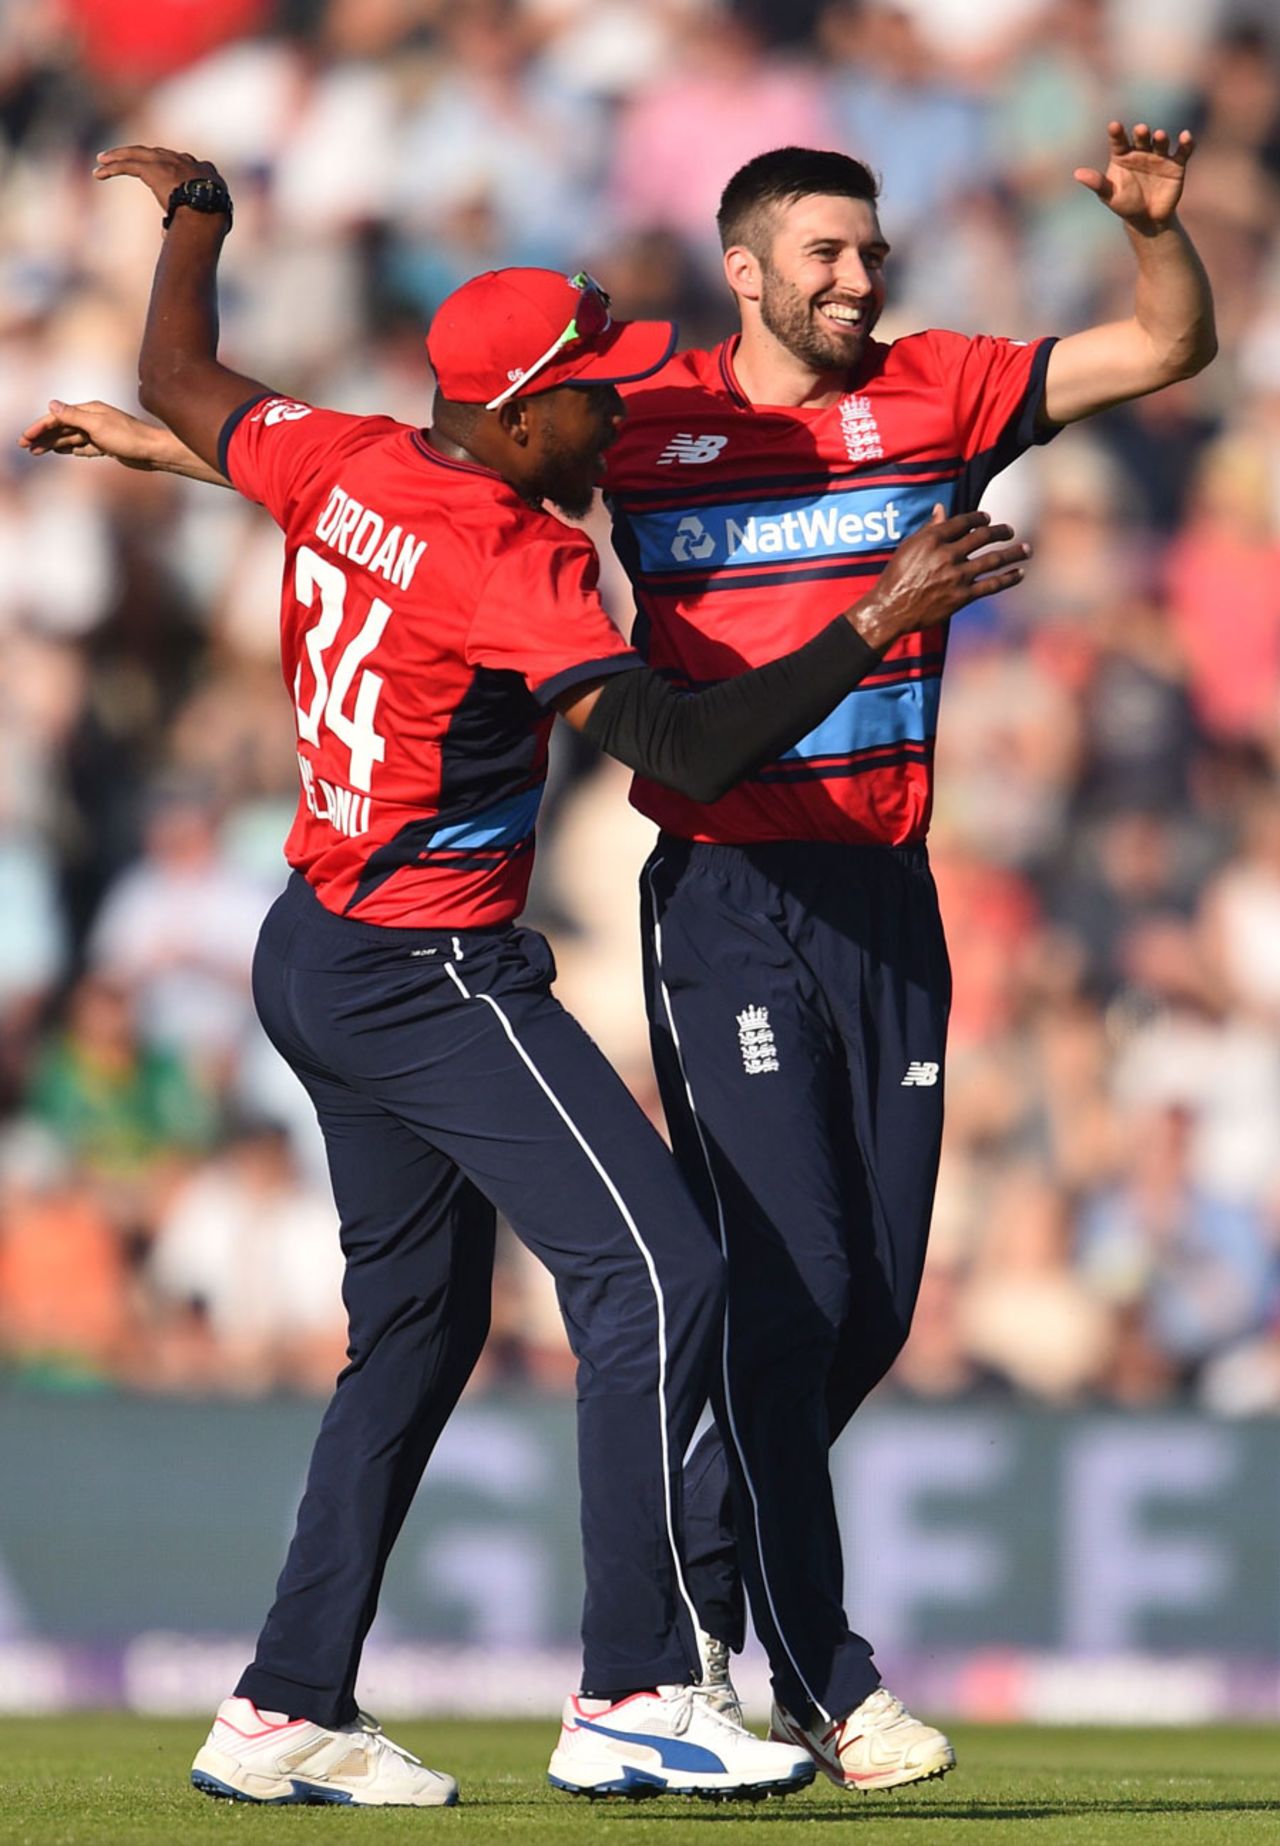 Mark Wood claimed a wicket with his opening delivery, England v South Africa, 1st T20I, Ageas Bowl, June 21, 2017